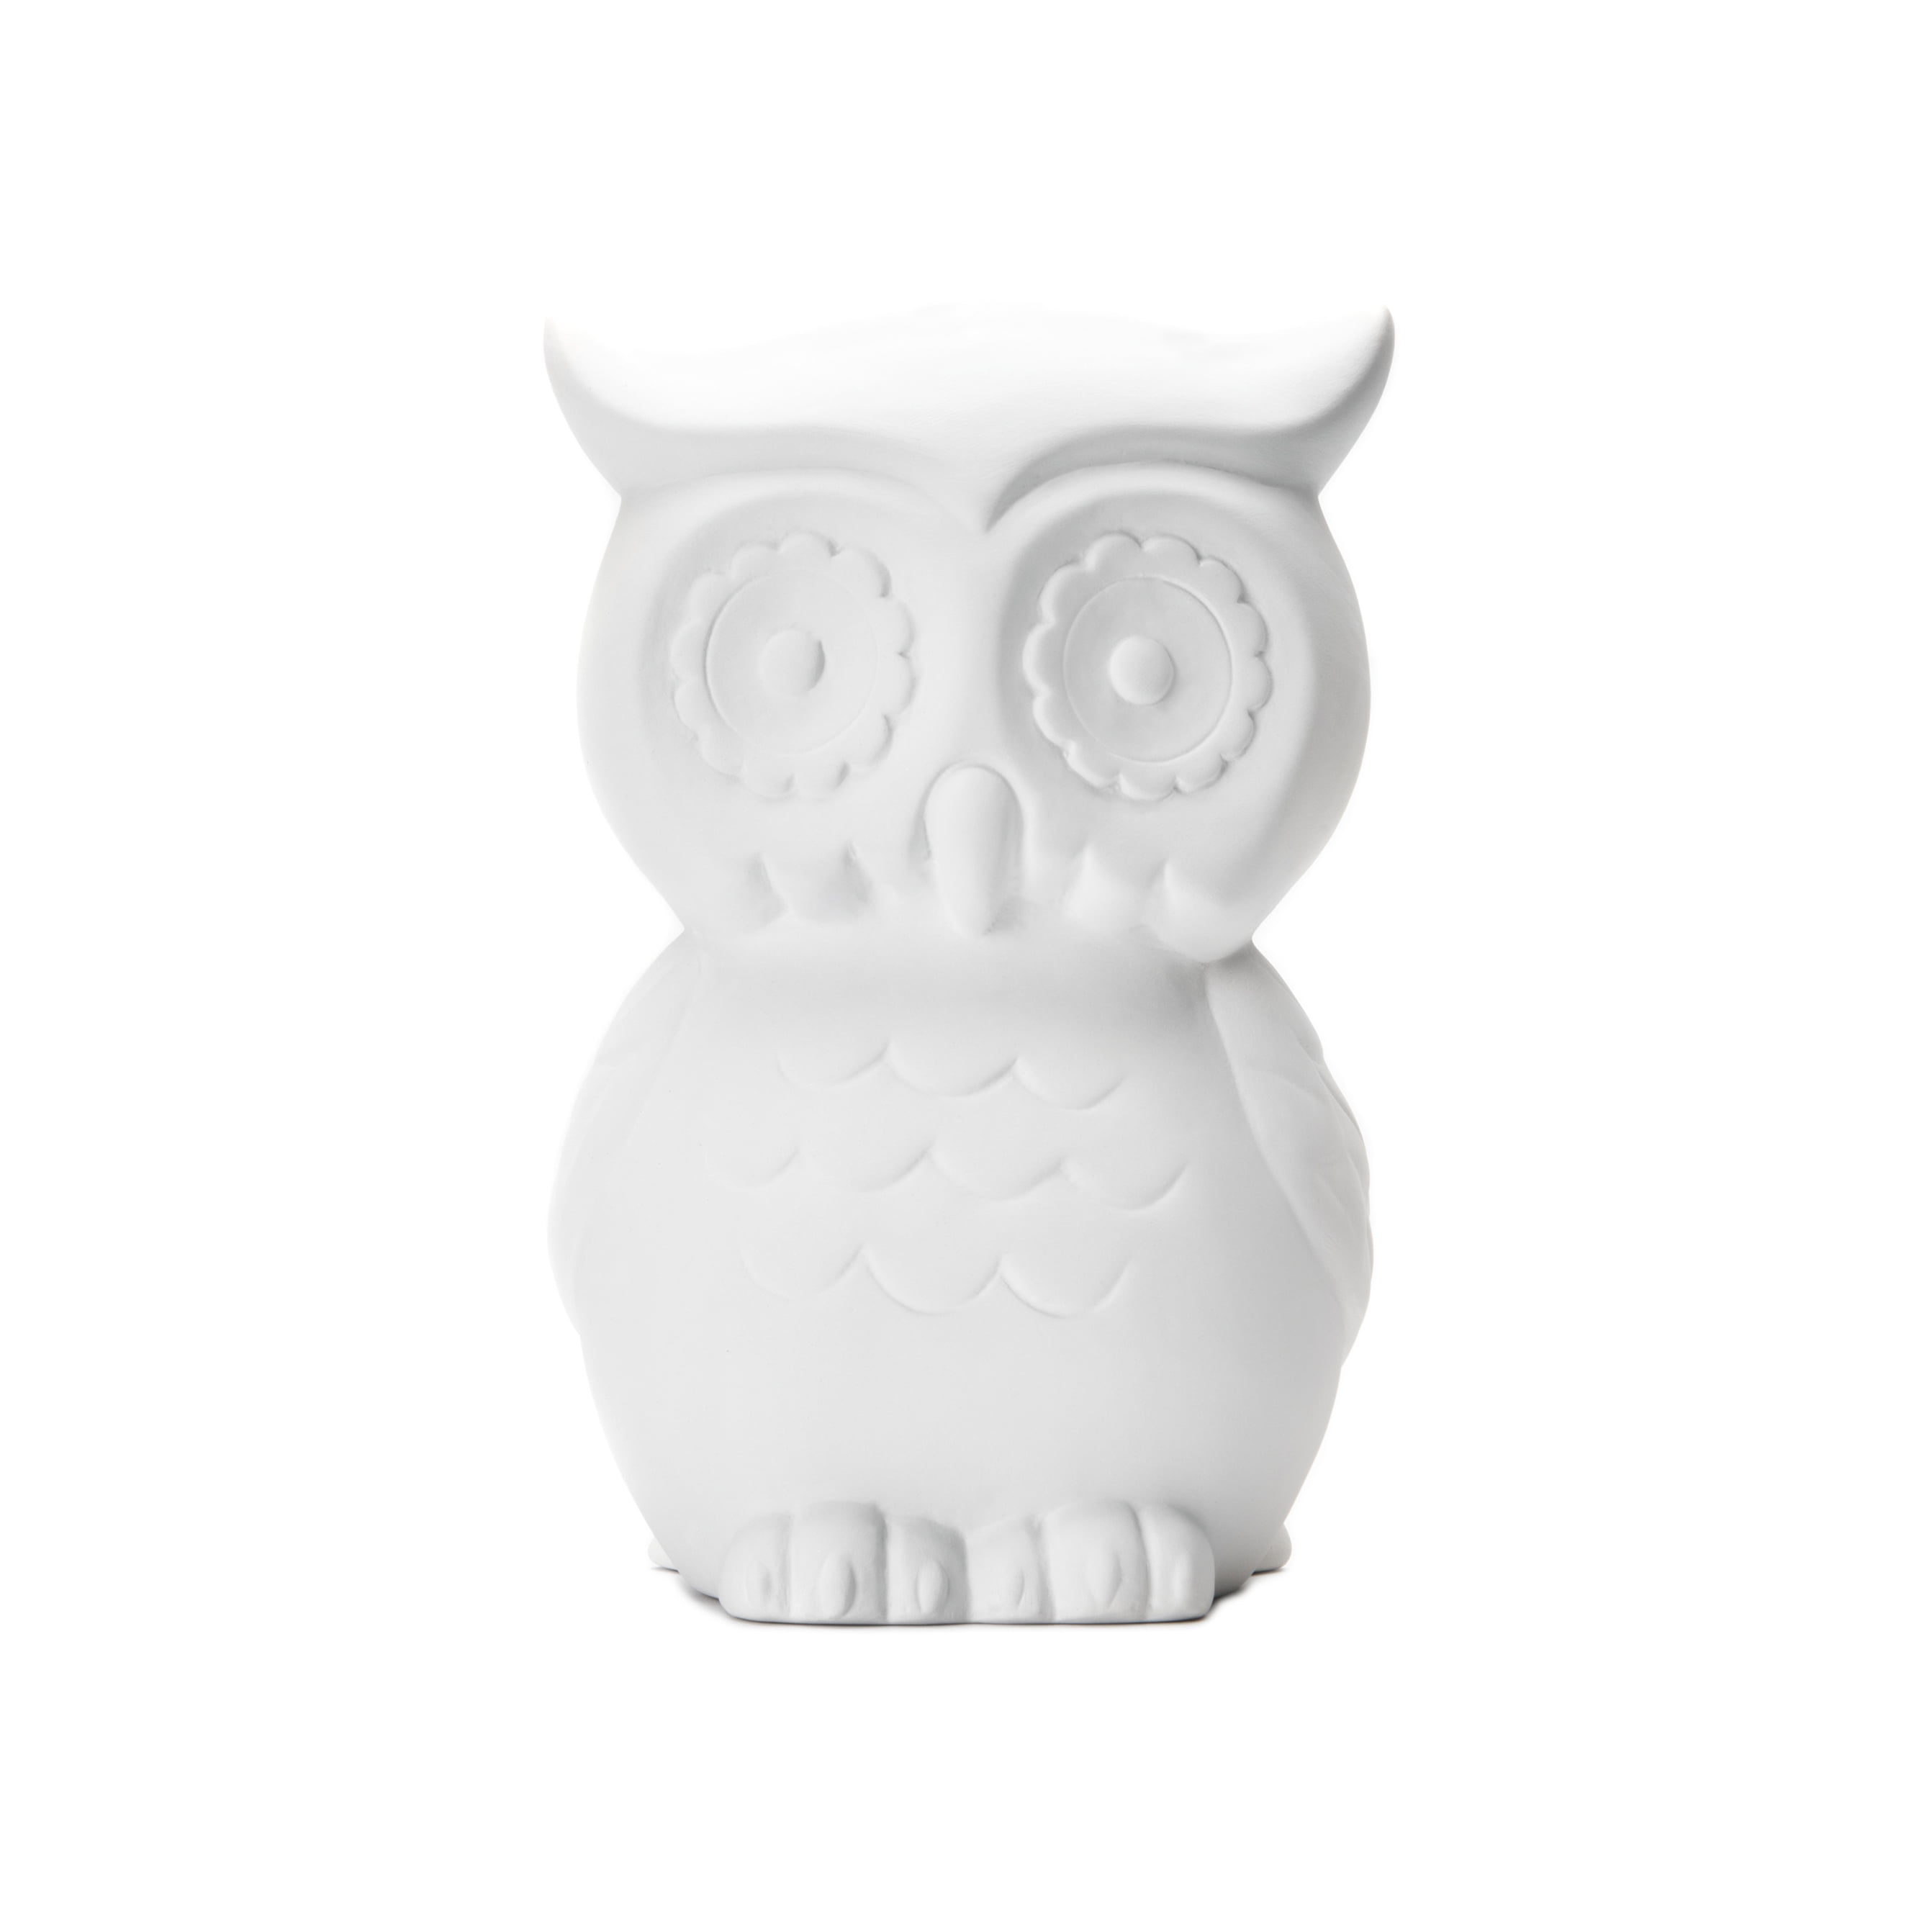 The Wise Owl Bank Paint Your Own Ceramic Keepsake 